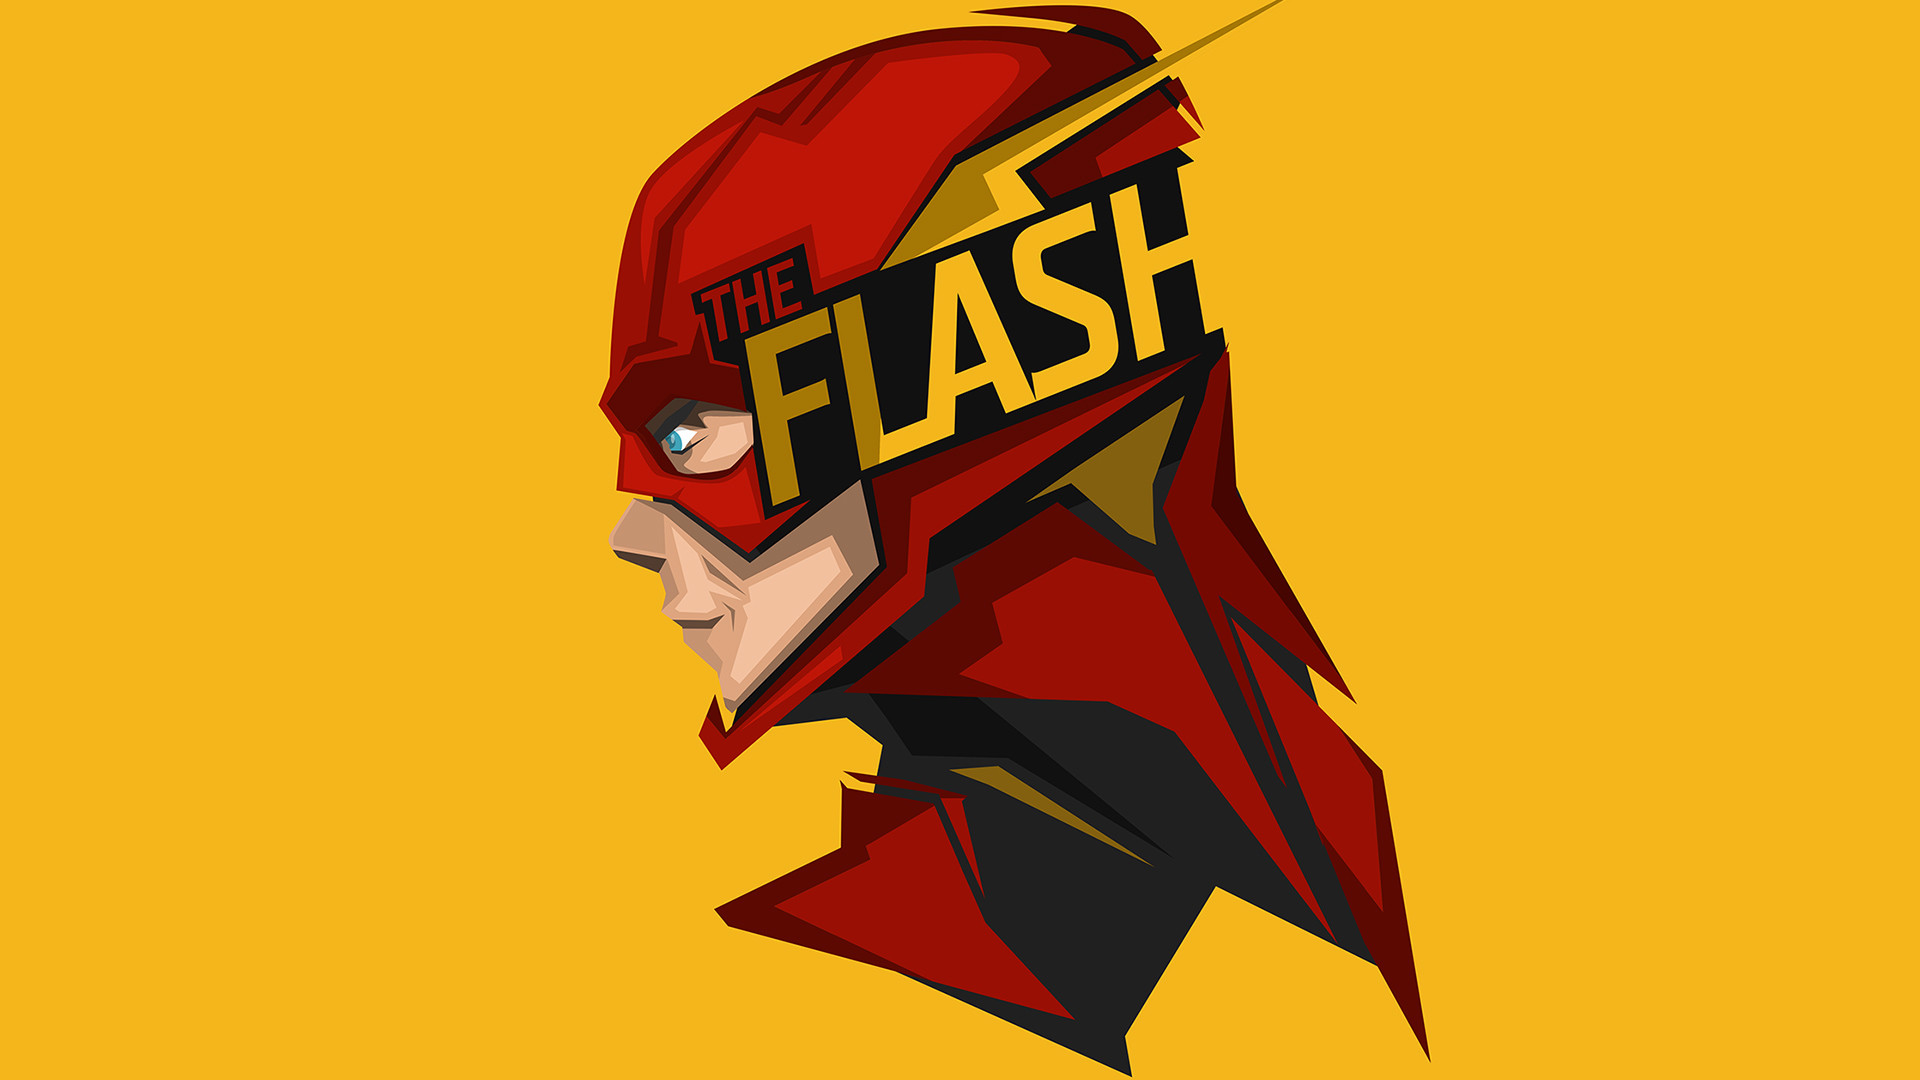 The flash wallpapers hd pictures images for desktop imgcer com